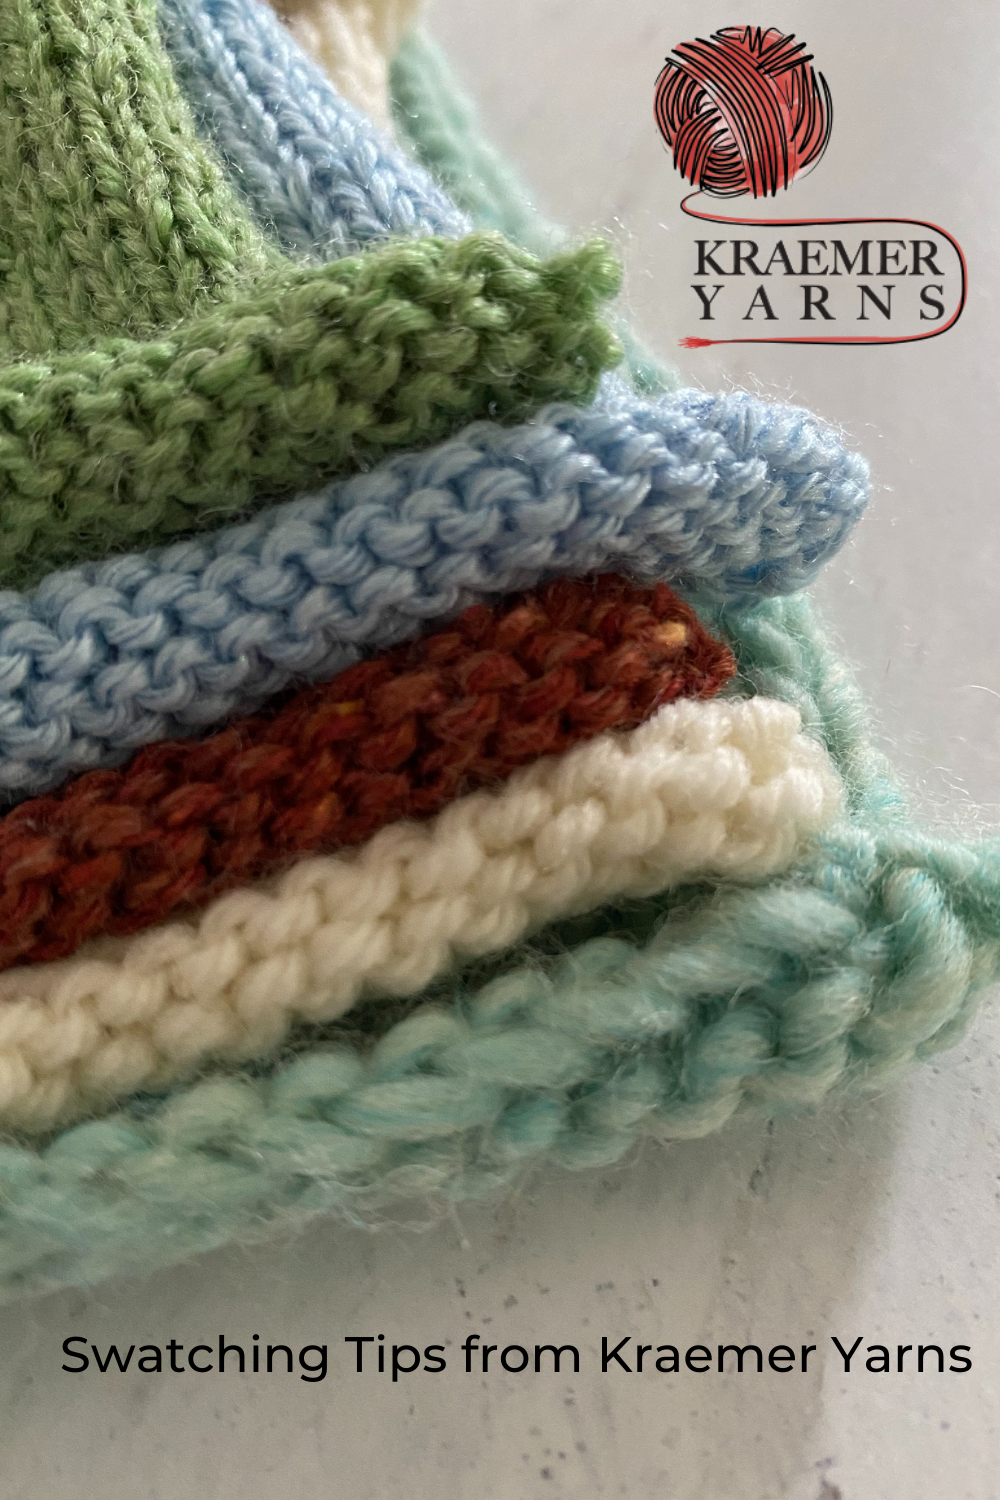 Swatching tips from Kraemer Yarns